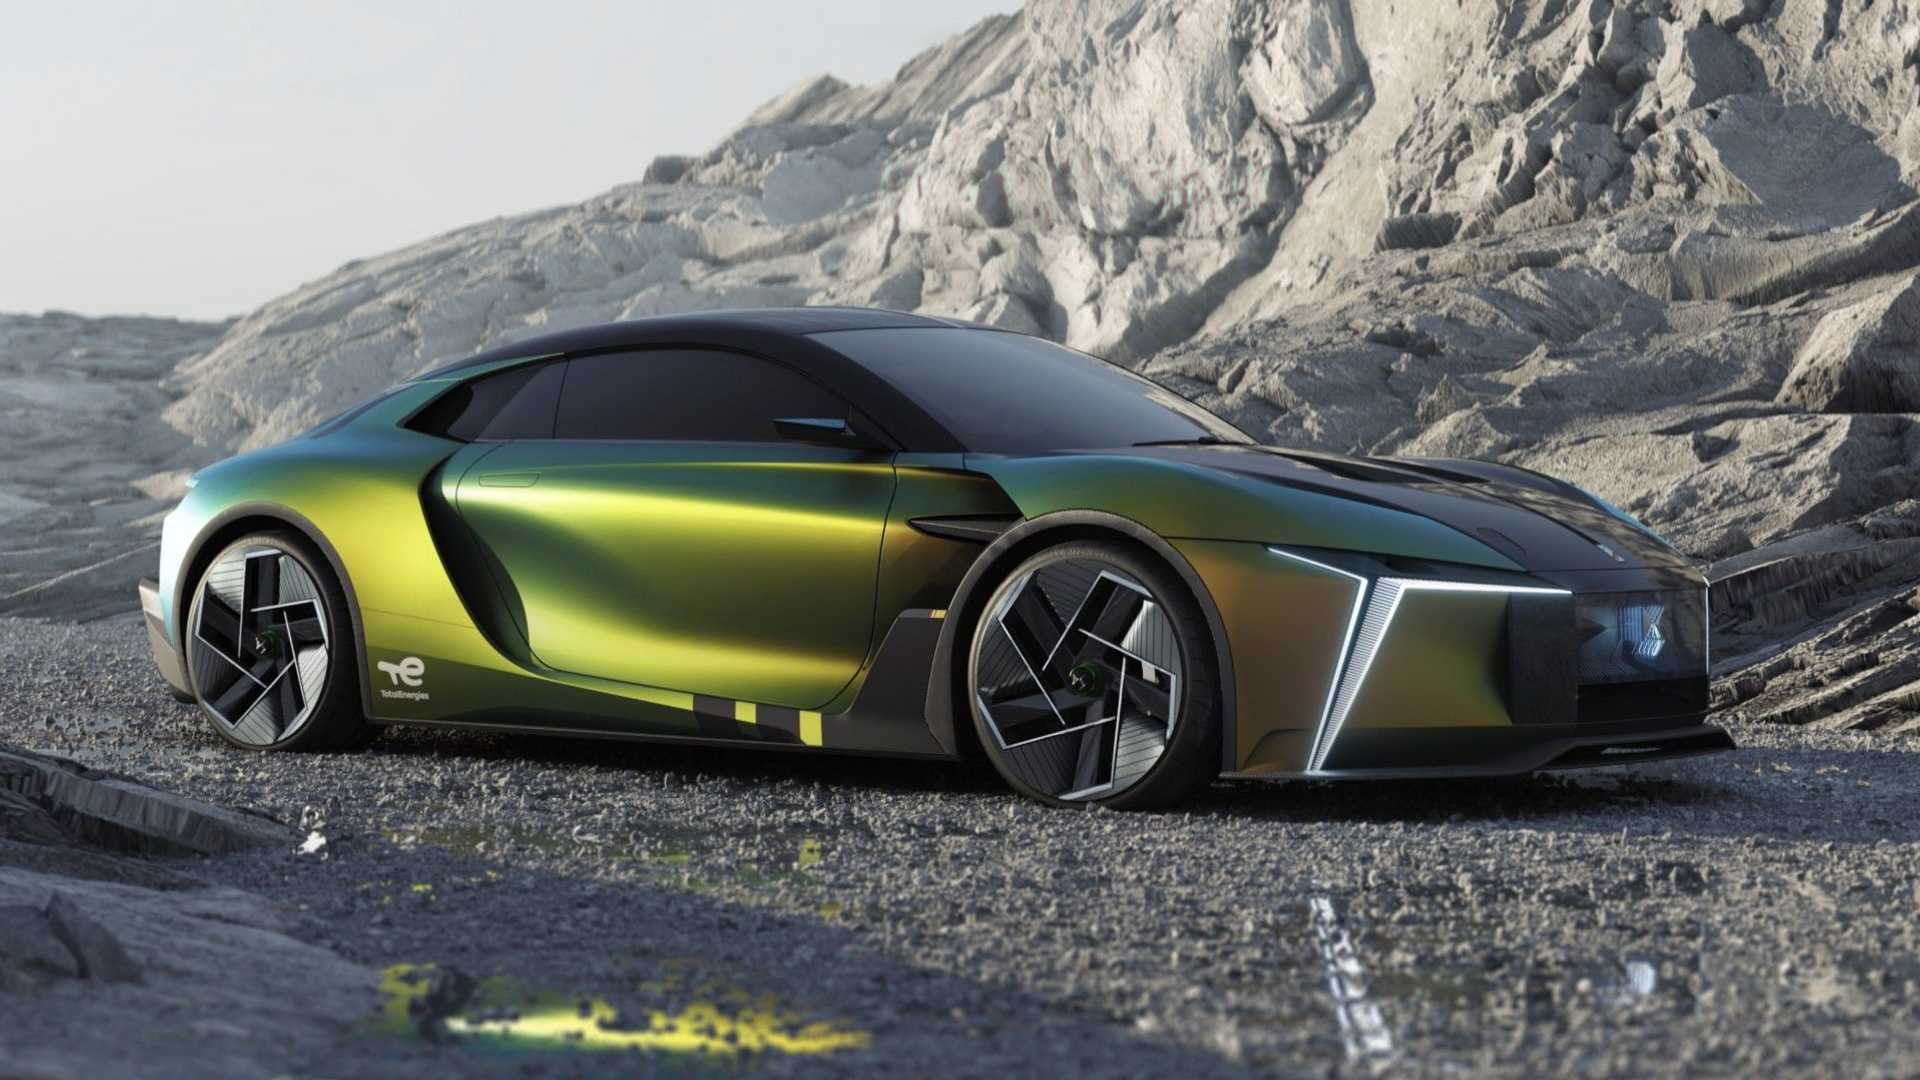 DS E Tense Performance Is An 805 HP Laboratory For Future EVs